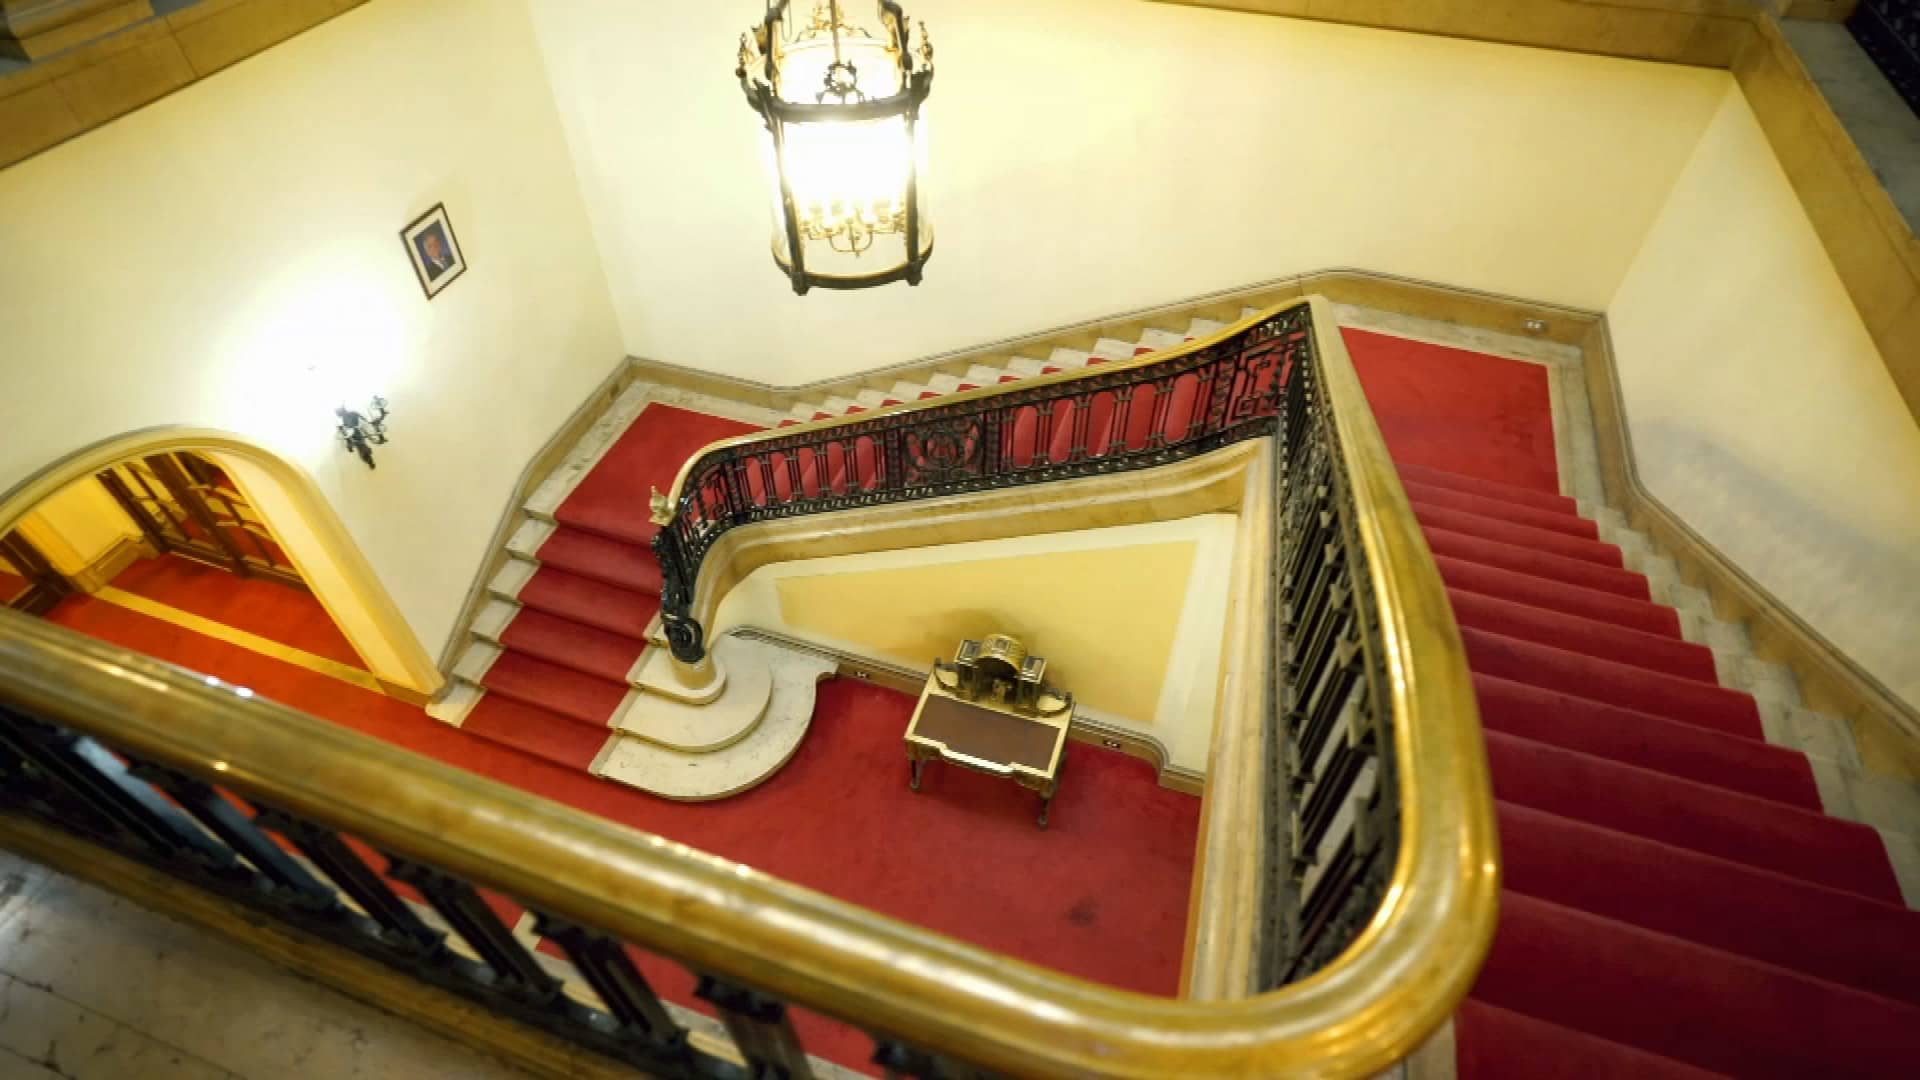 The marble staircase dominates the main foyer.